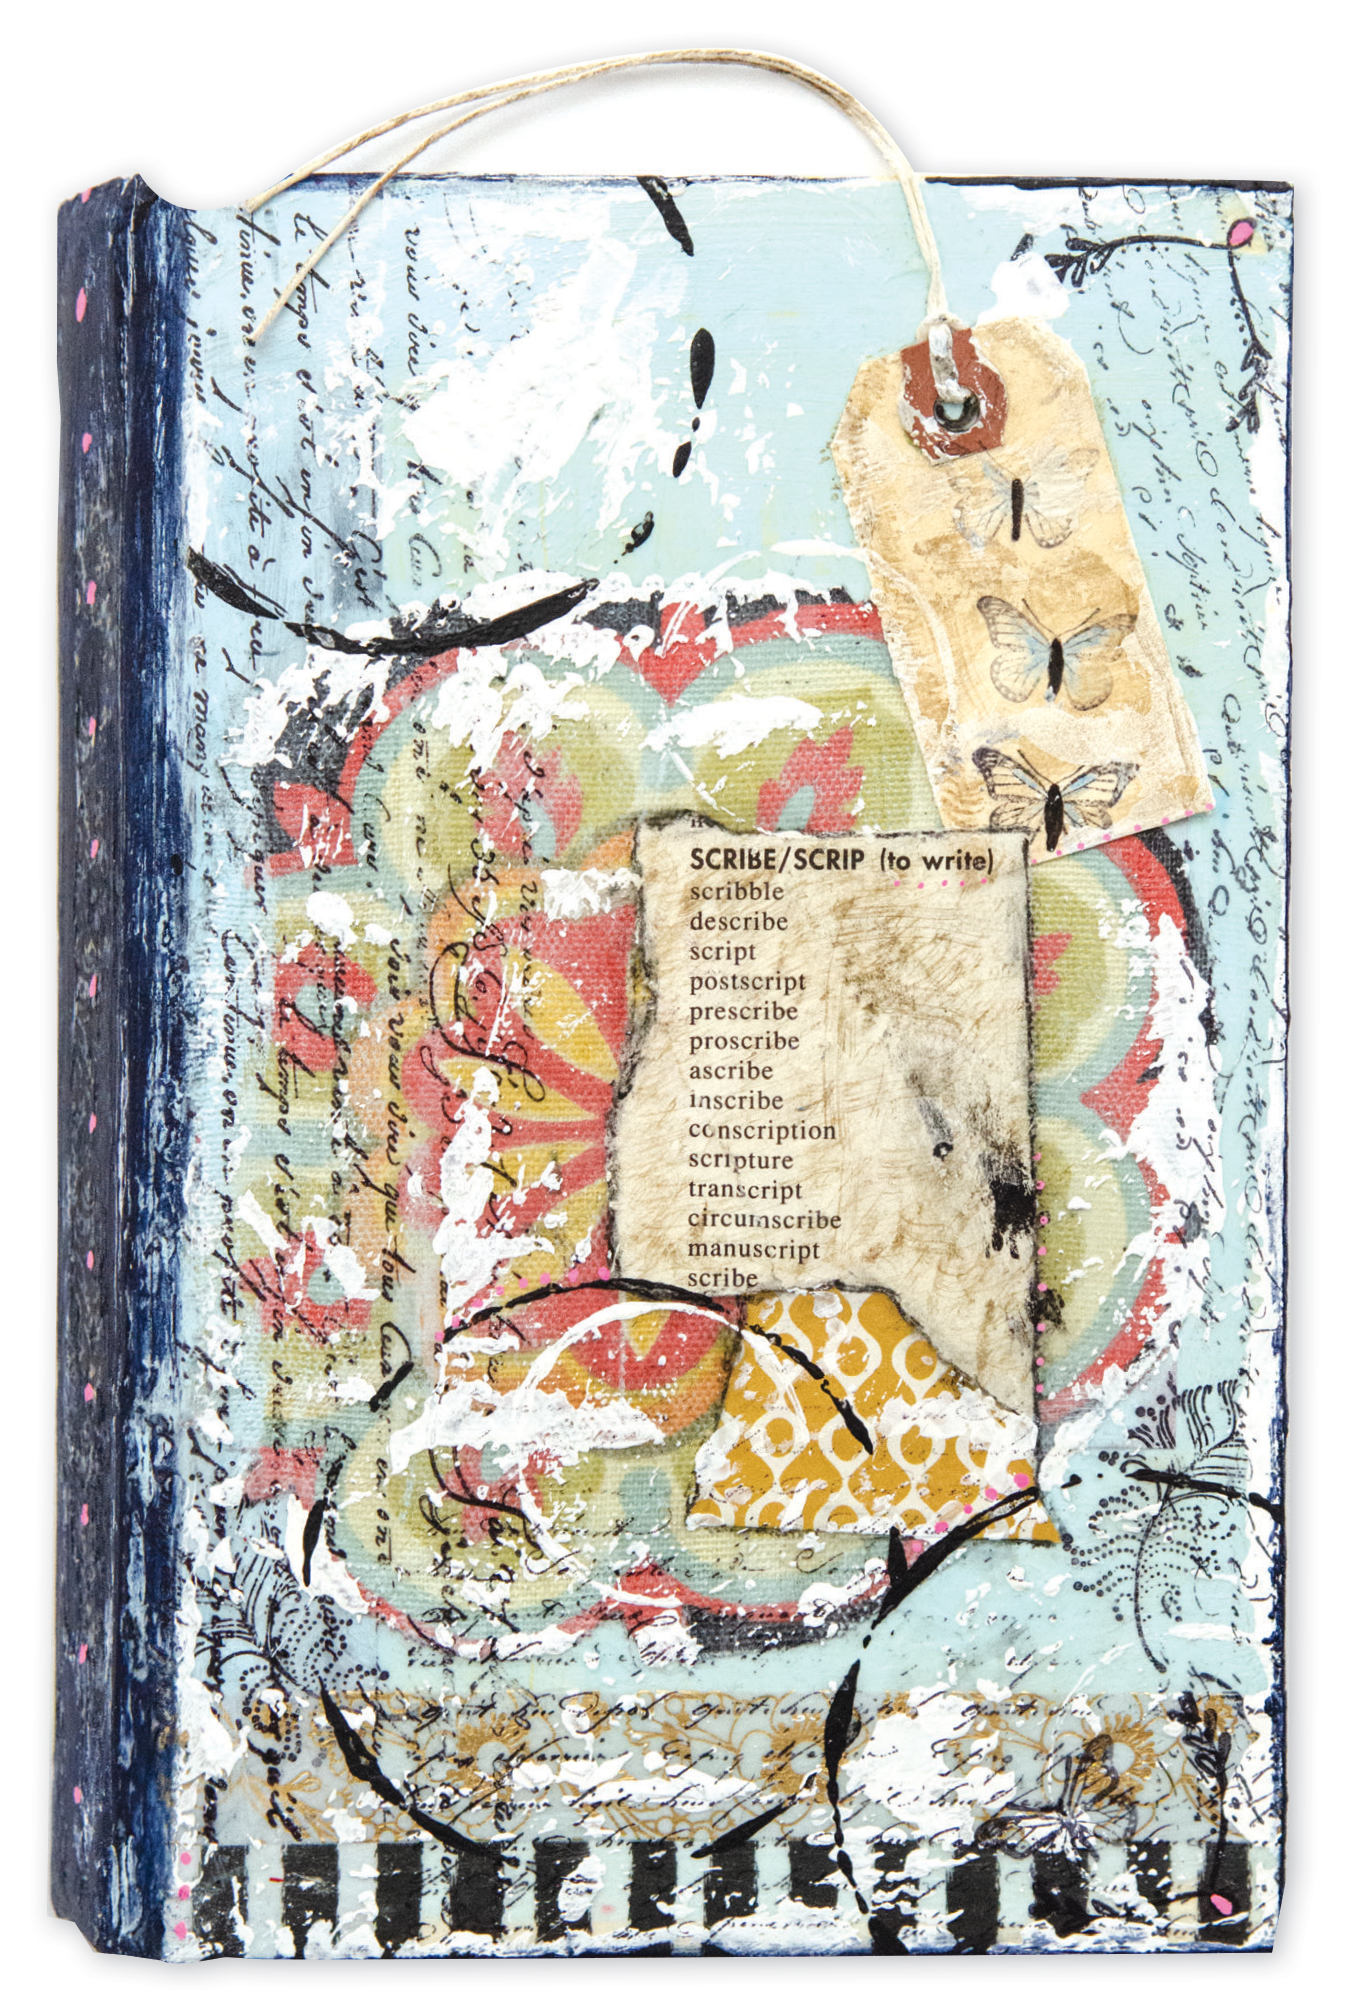 Adding words into your art journal - Mixed Media Art